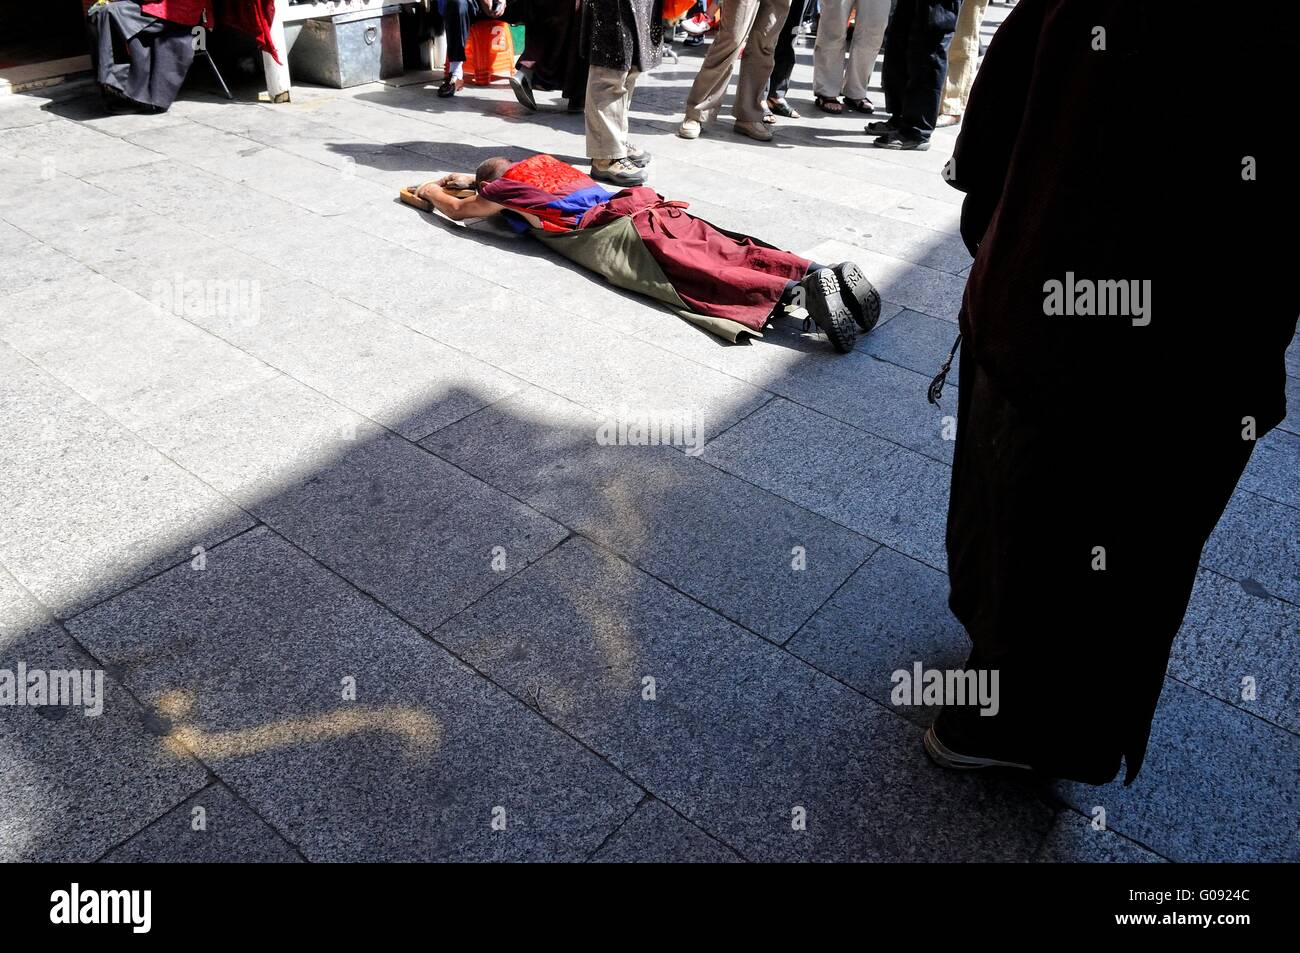 creditors during the prostration pilgrimage Lhasa Stock Photo